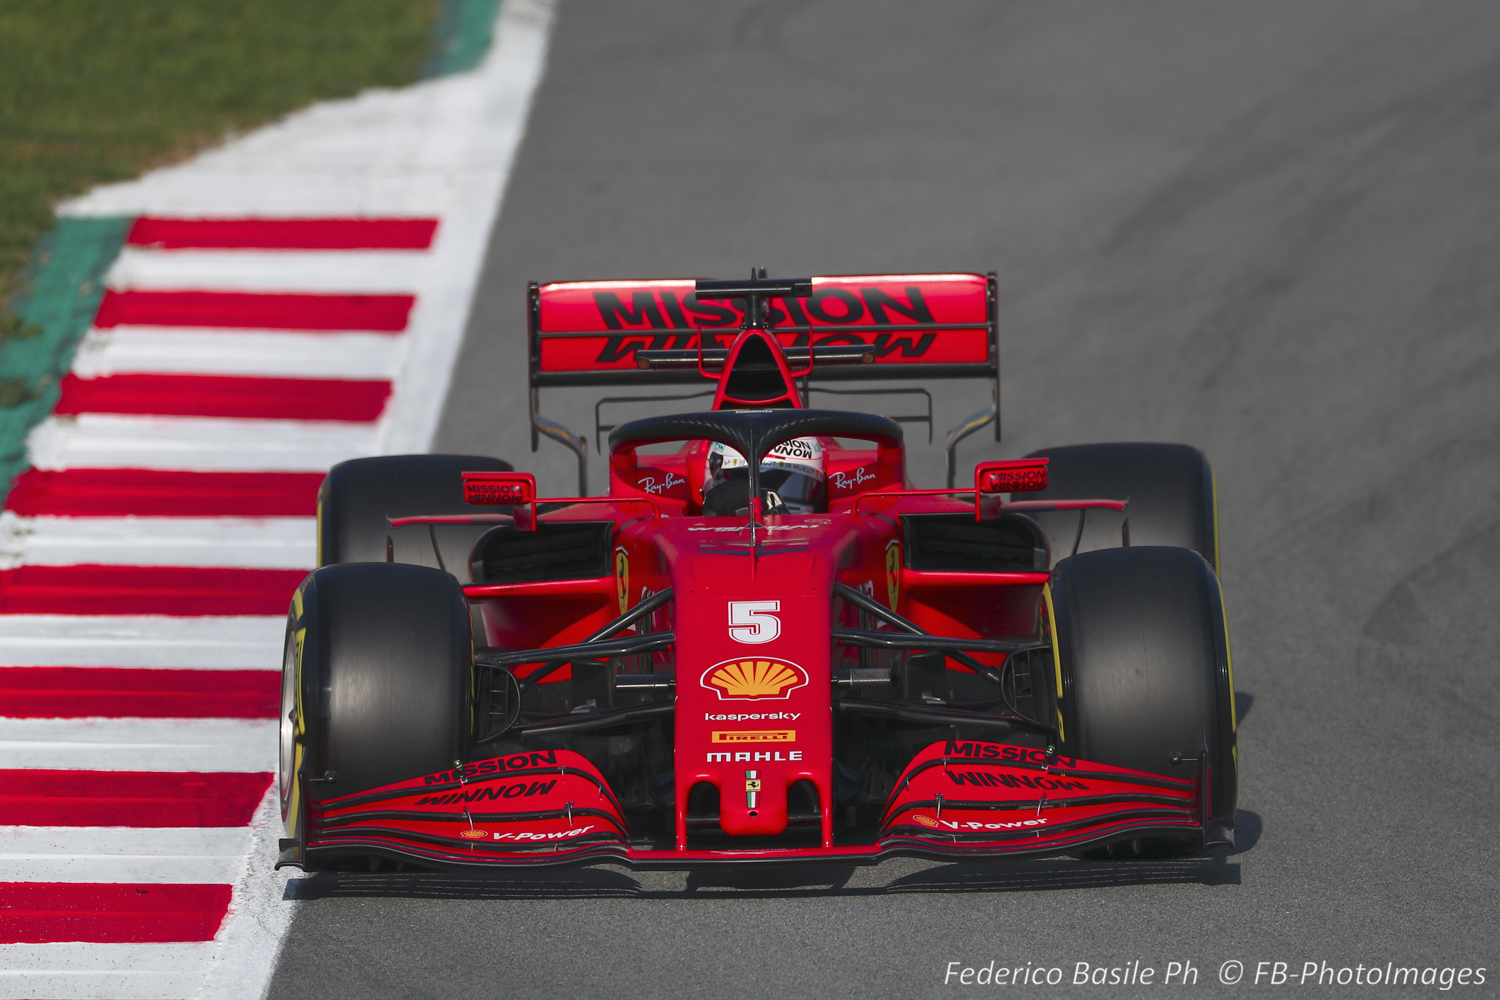 Vettel has little chance to shine in 2020, the latest Ferrari is too slow